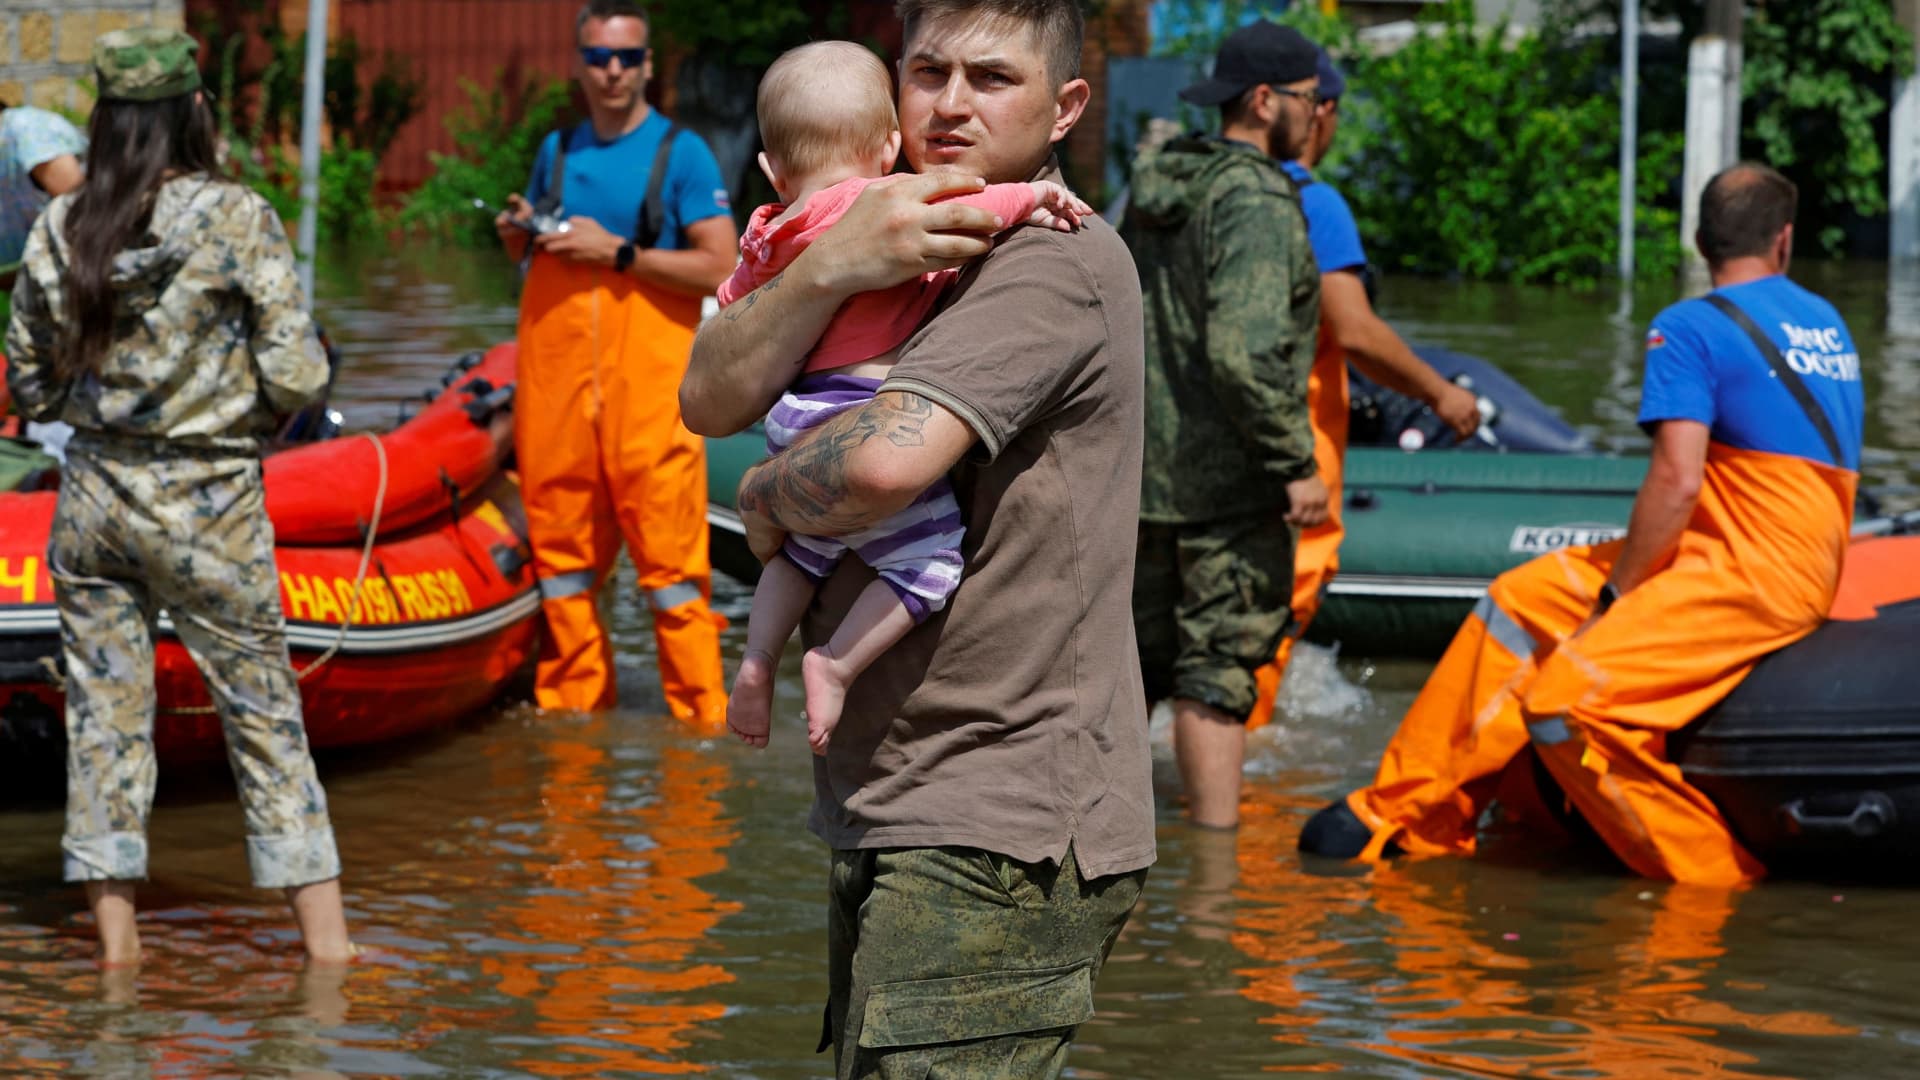 A man carries a child as members of Russia's emergencies ministry evacuate residents of a flooded area following the collapse of the Nova Kakhovka dam in the course of Russia-Ukraine conflict, in the town of Hola Prystan in the Kherson region, Russian-controlled Ukraine, June 8, 2023. 